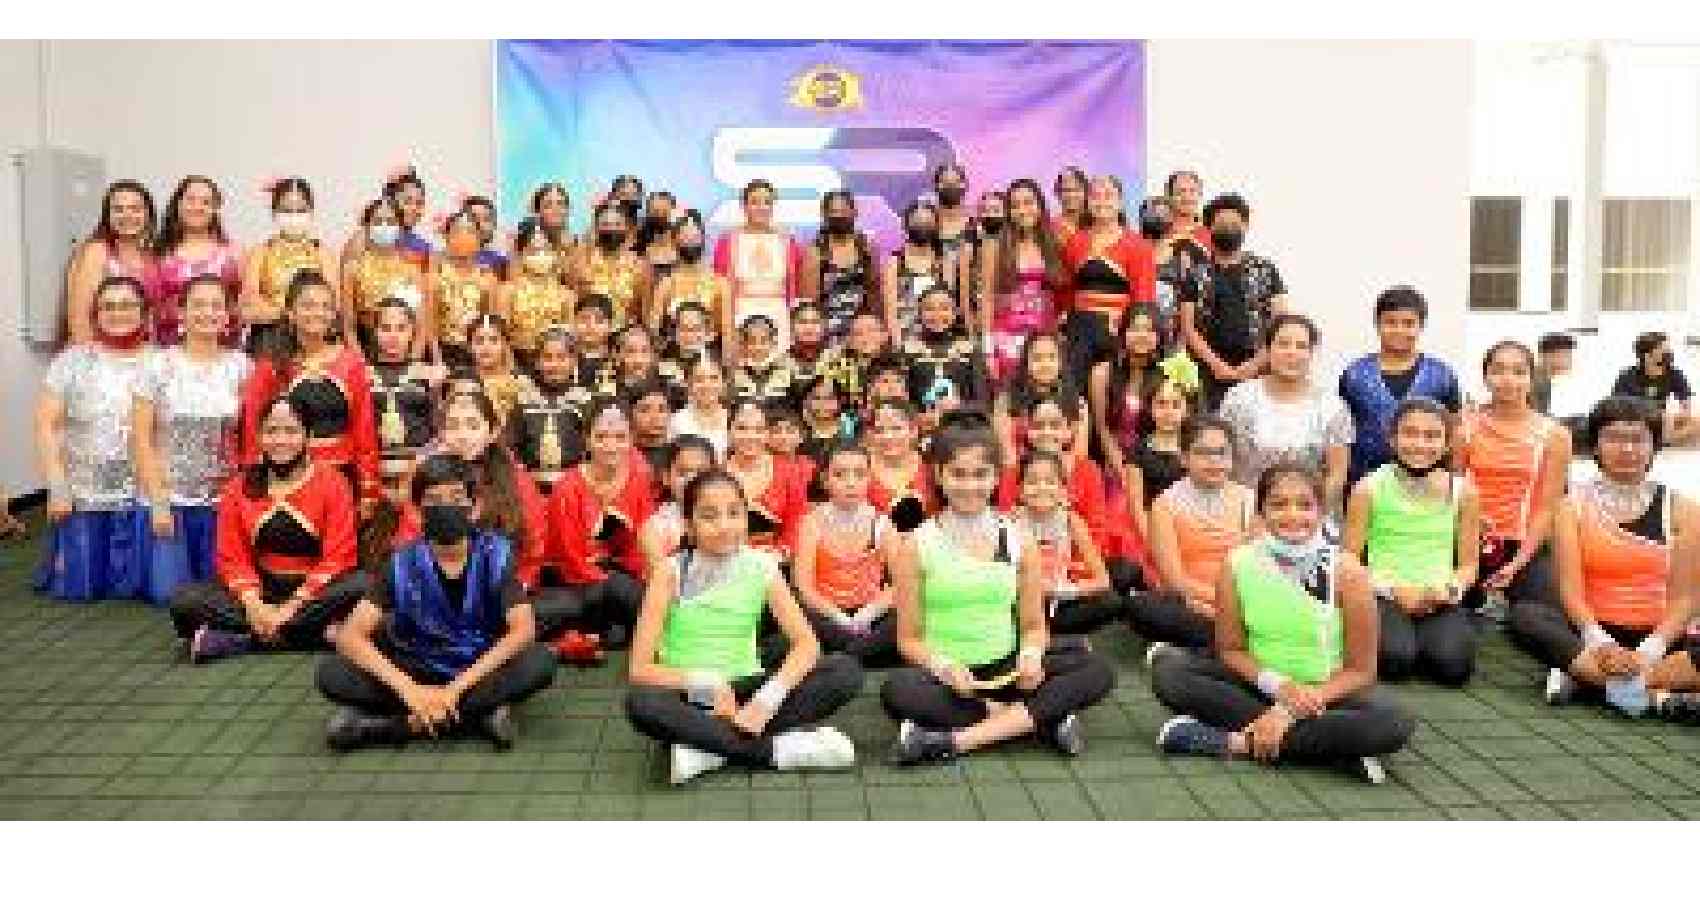 S R Dance Academy’s Spectacular Dance Performance Held in Chicago